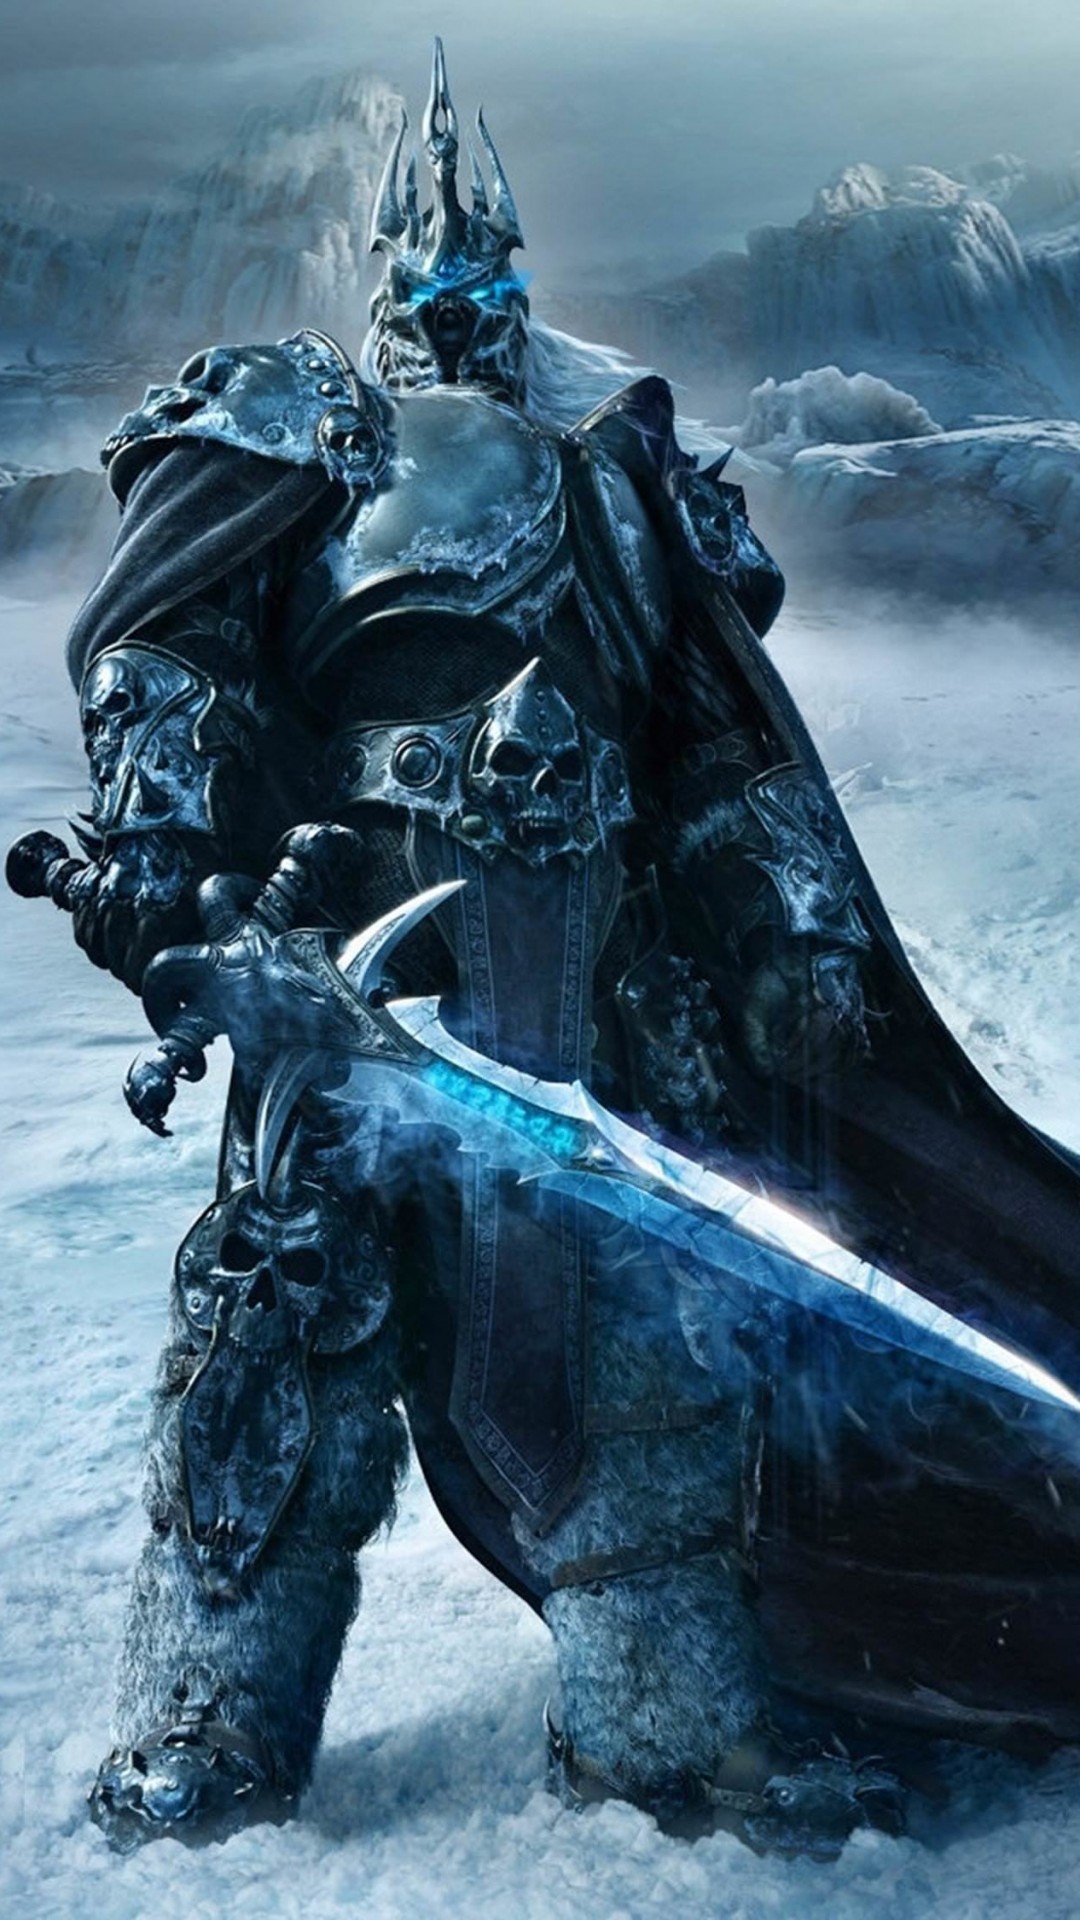 World of Warcraft: Wrath of the Lich King Wallpaper for SAMSUNG Galaxy S5